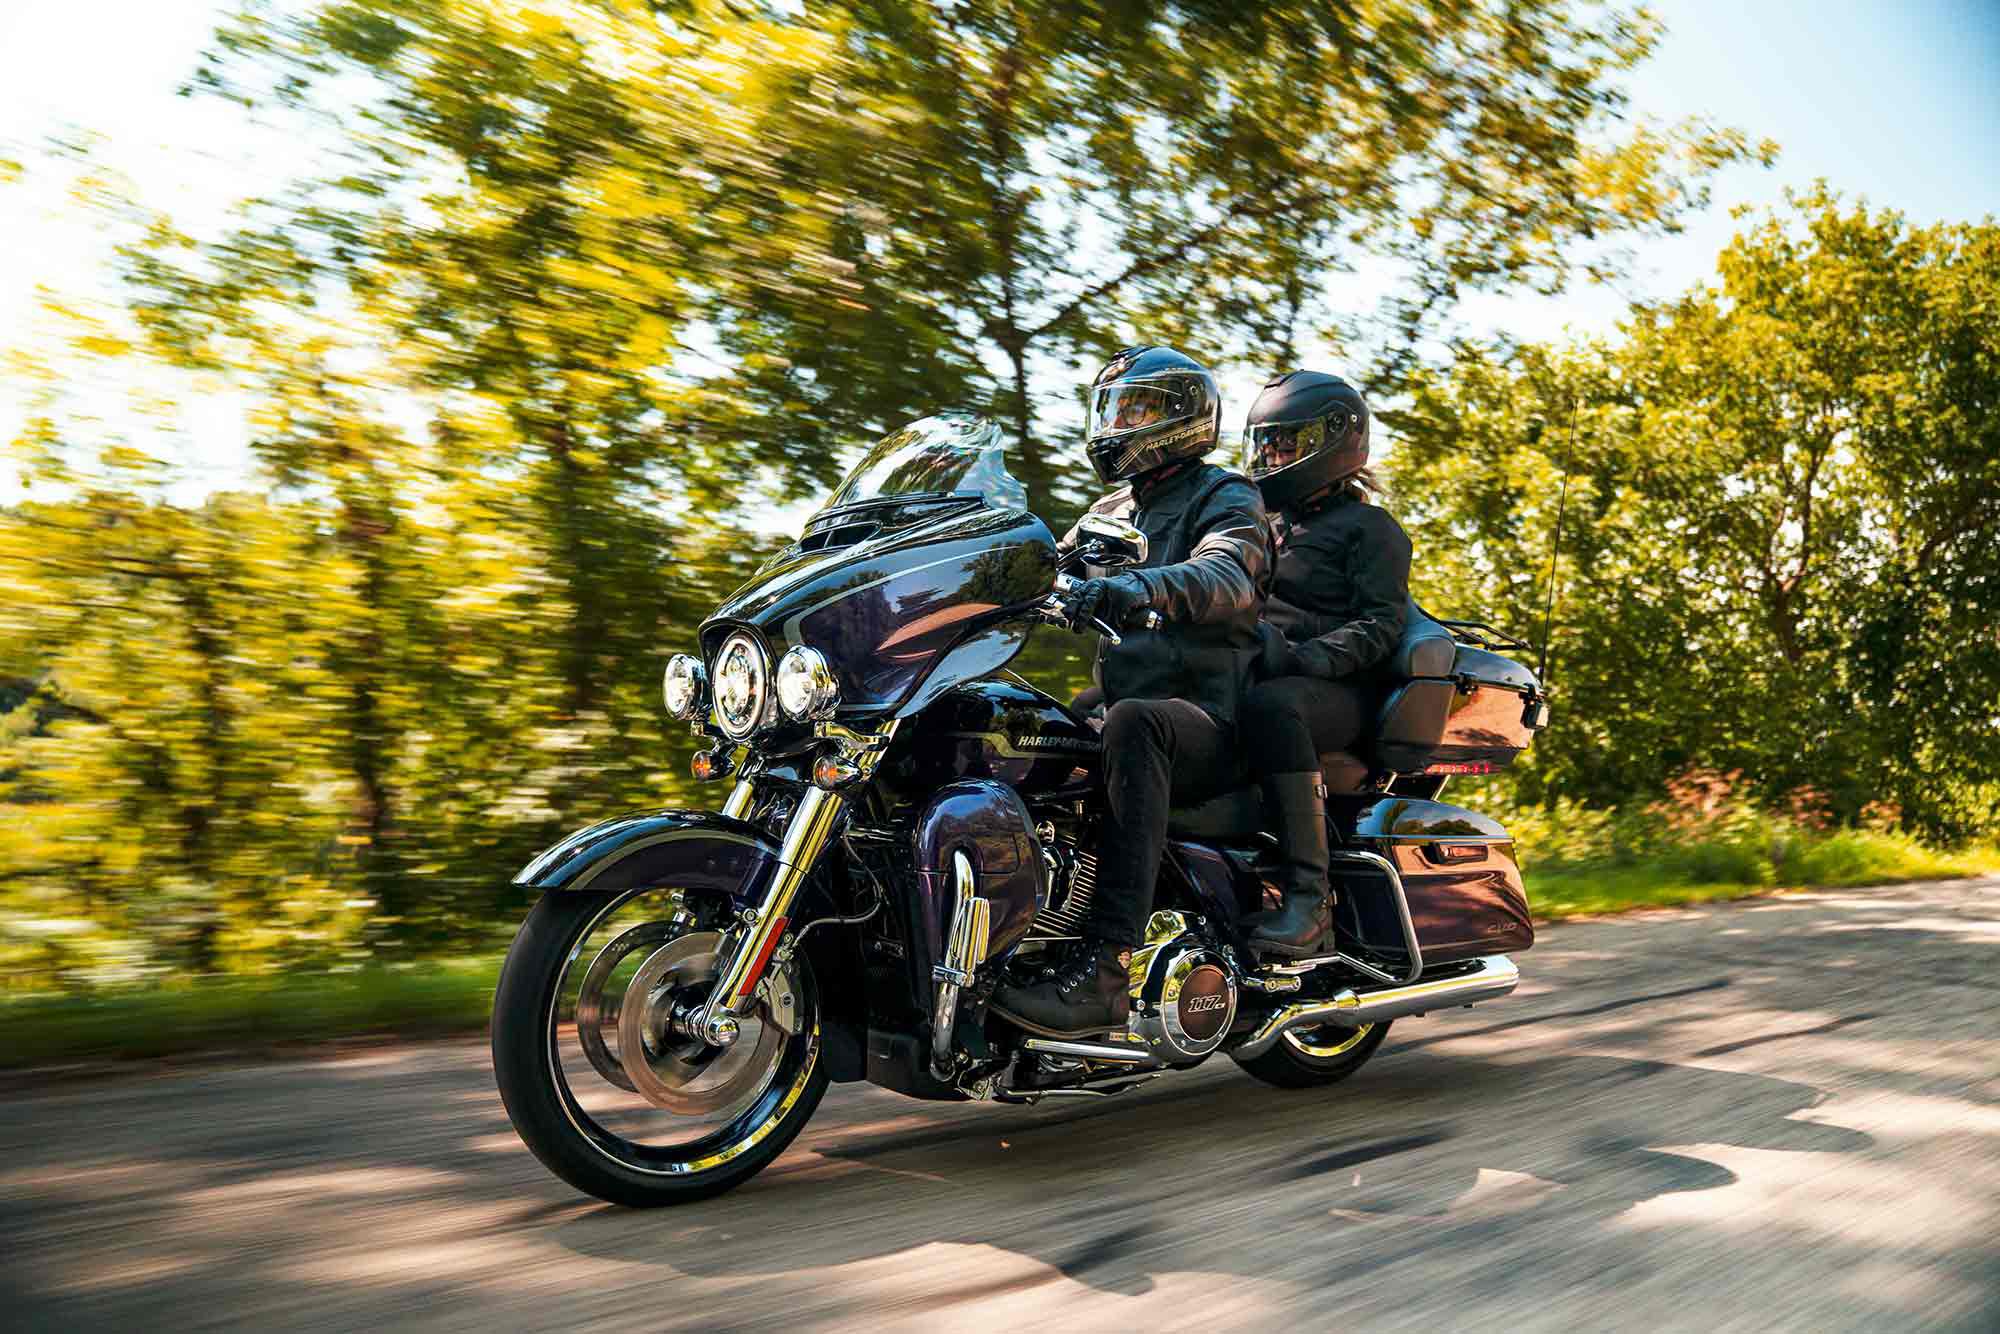 The Harley-Davidson CVO Limited is a powerful and well-equipped option for riders with cash to spare.